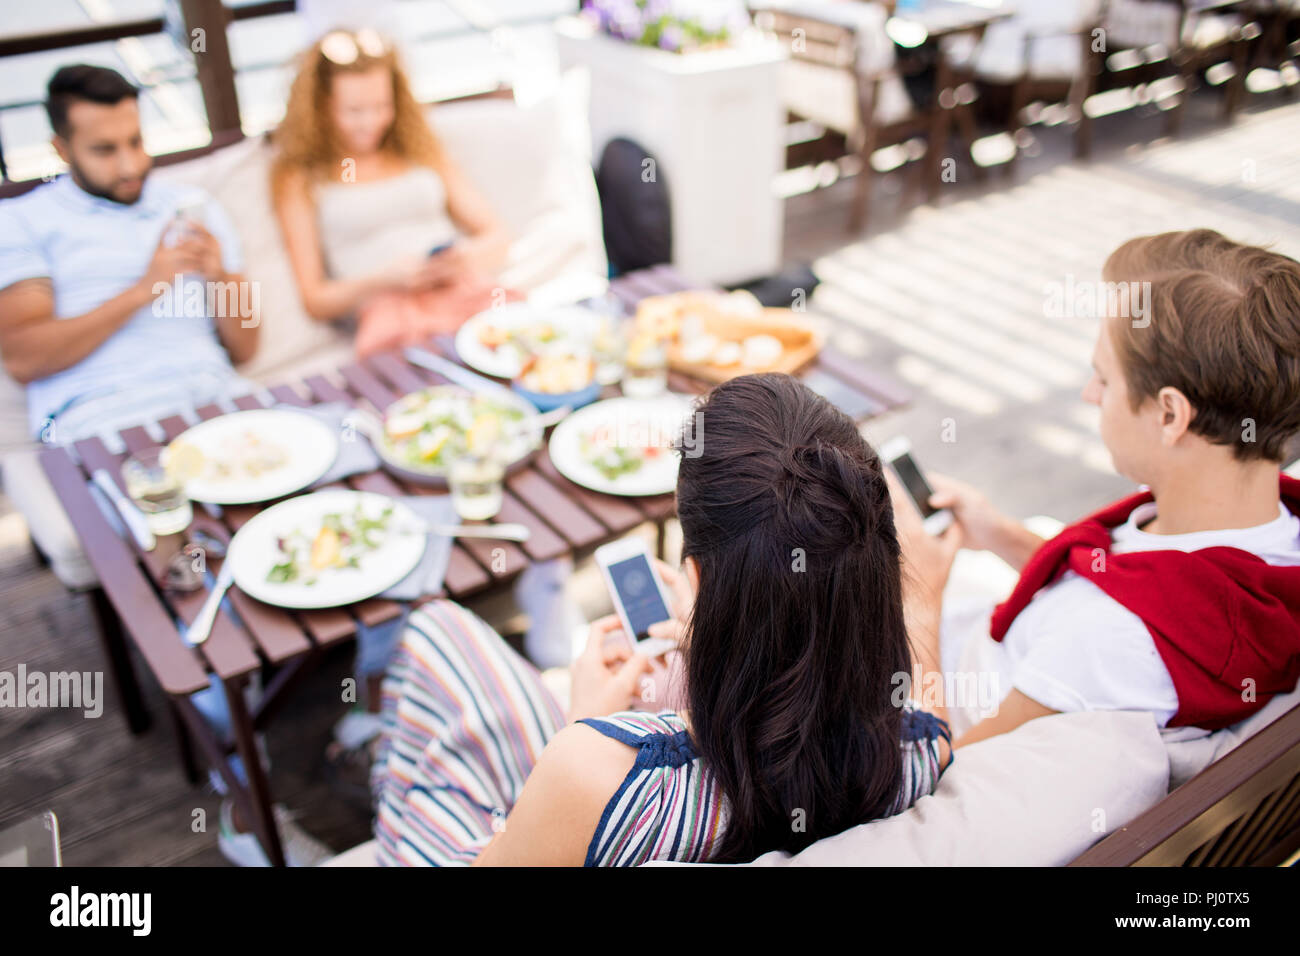 People Using Smartphones at Cafe Table Stock Photo